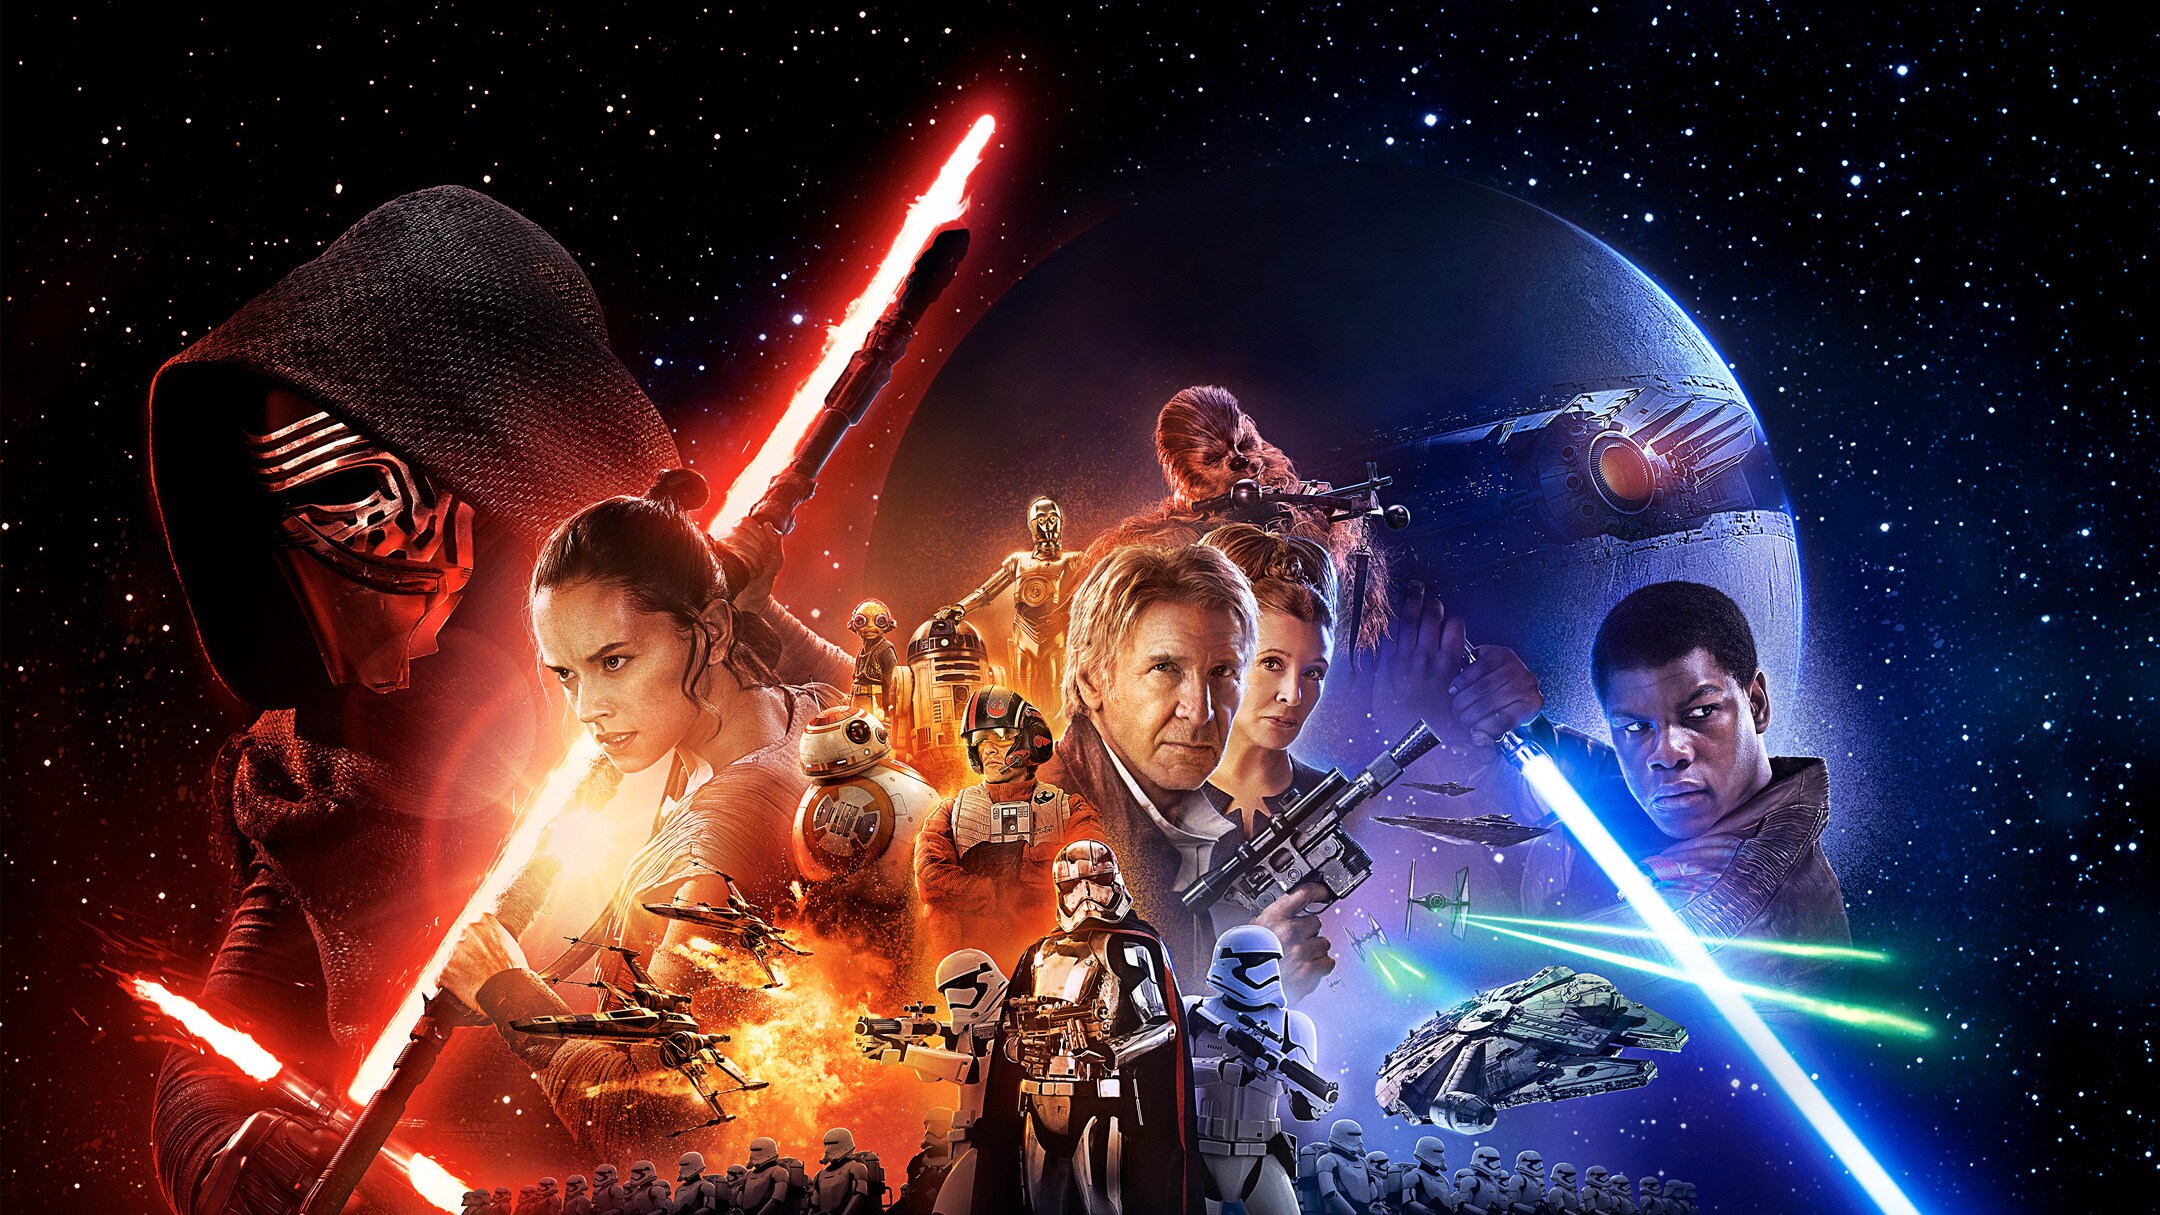 Star Wars: The Force Awakens Theatrical Poster Look, In-theater Exclusives and More | StarWars.com